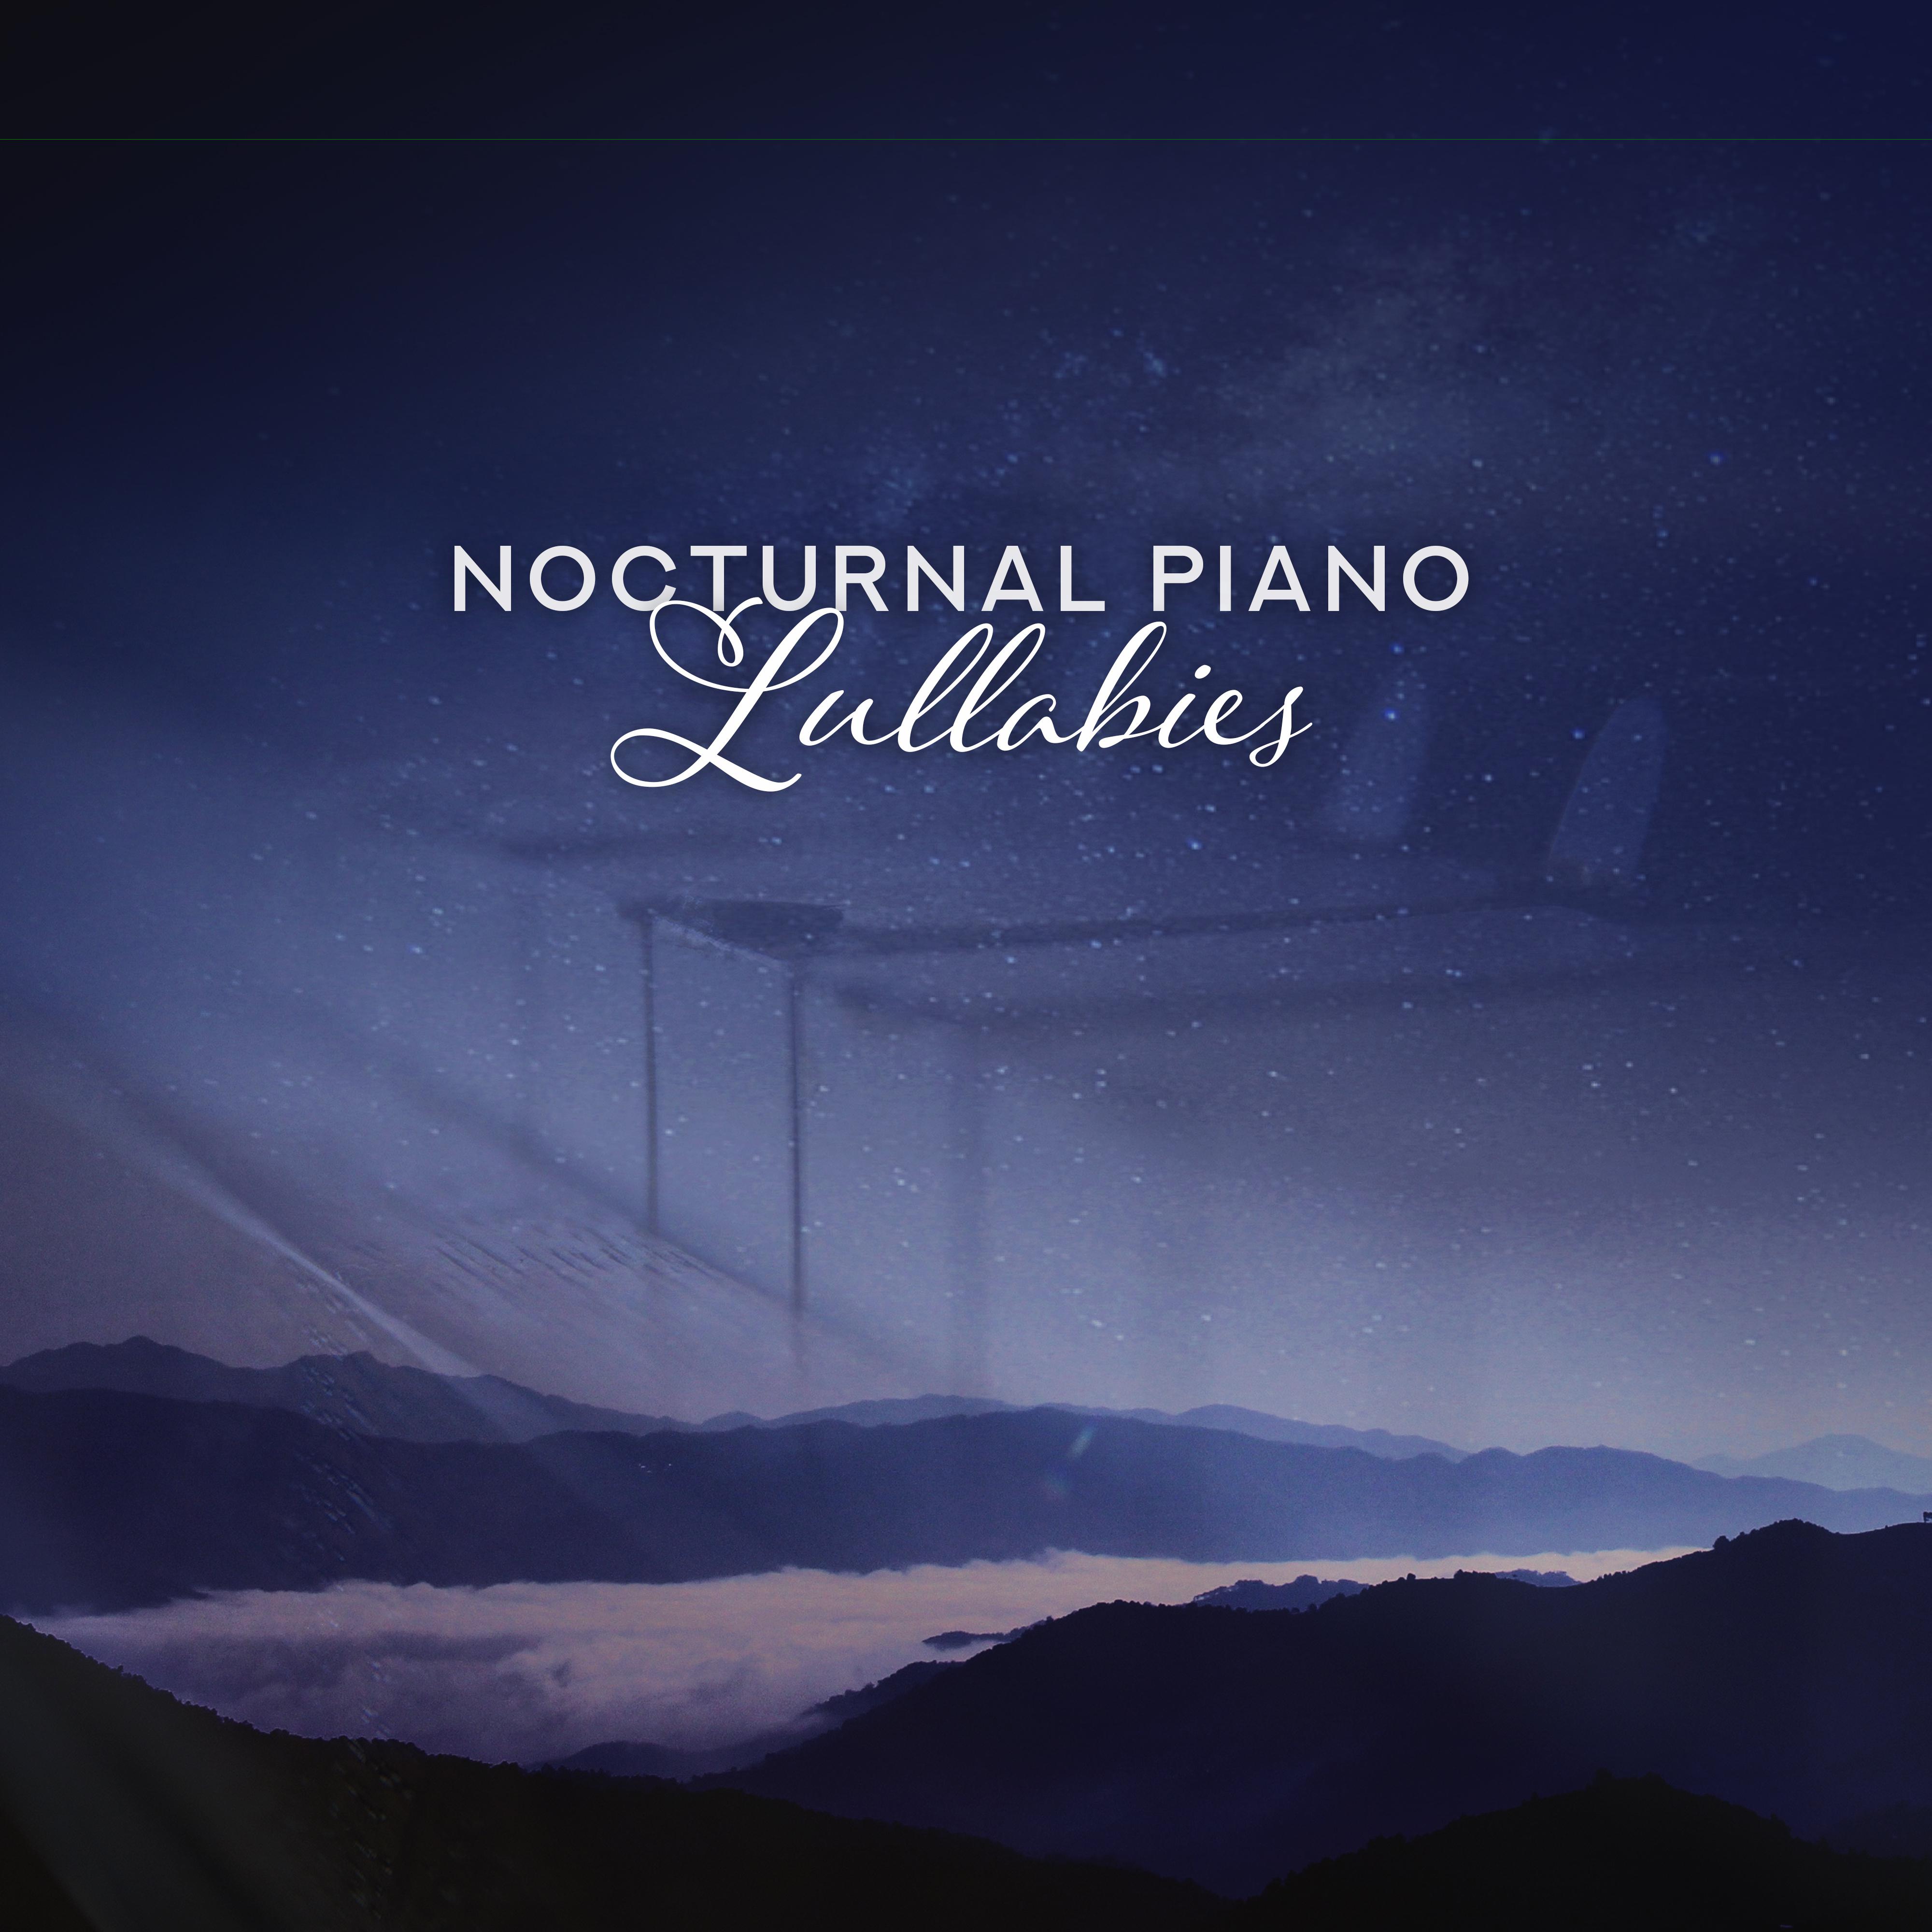 Nocturnal Piano Lullabies: Beautiful Drowsy Music for Soothing Sleep, Piano Compositions for the Night, Quiet Instrumental Lullabies that Help You Fall Asleep Quickly and Easily